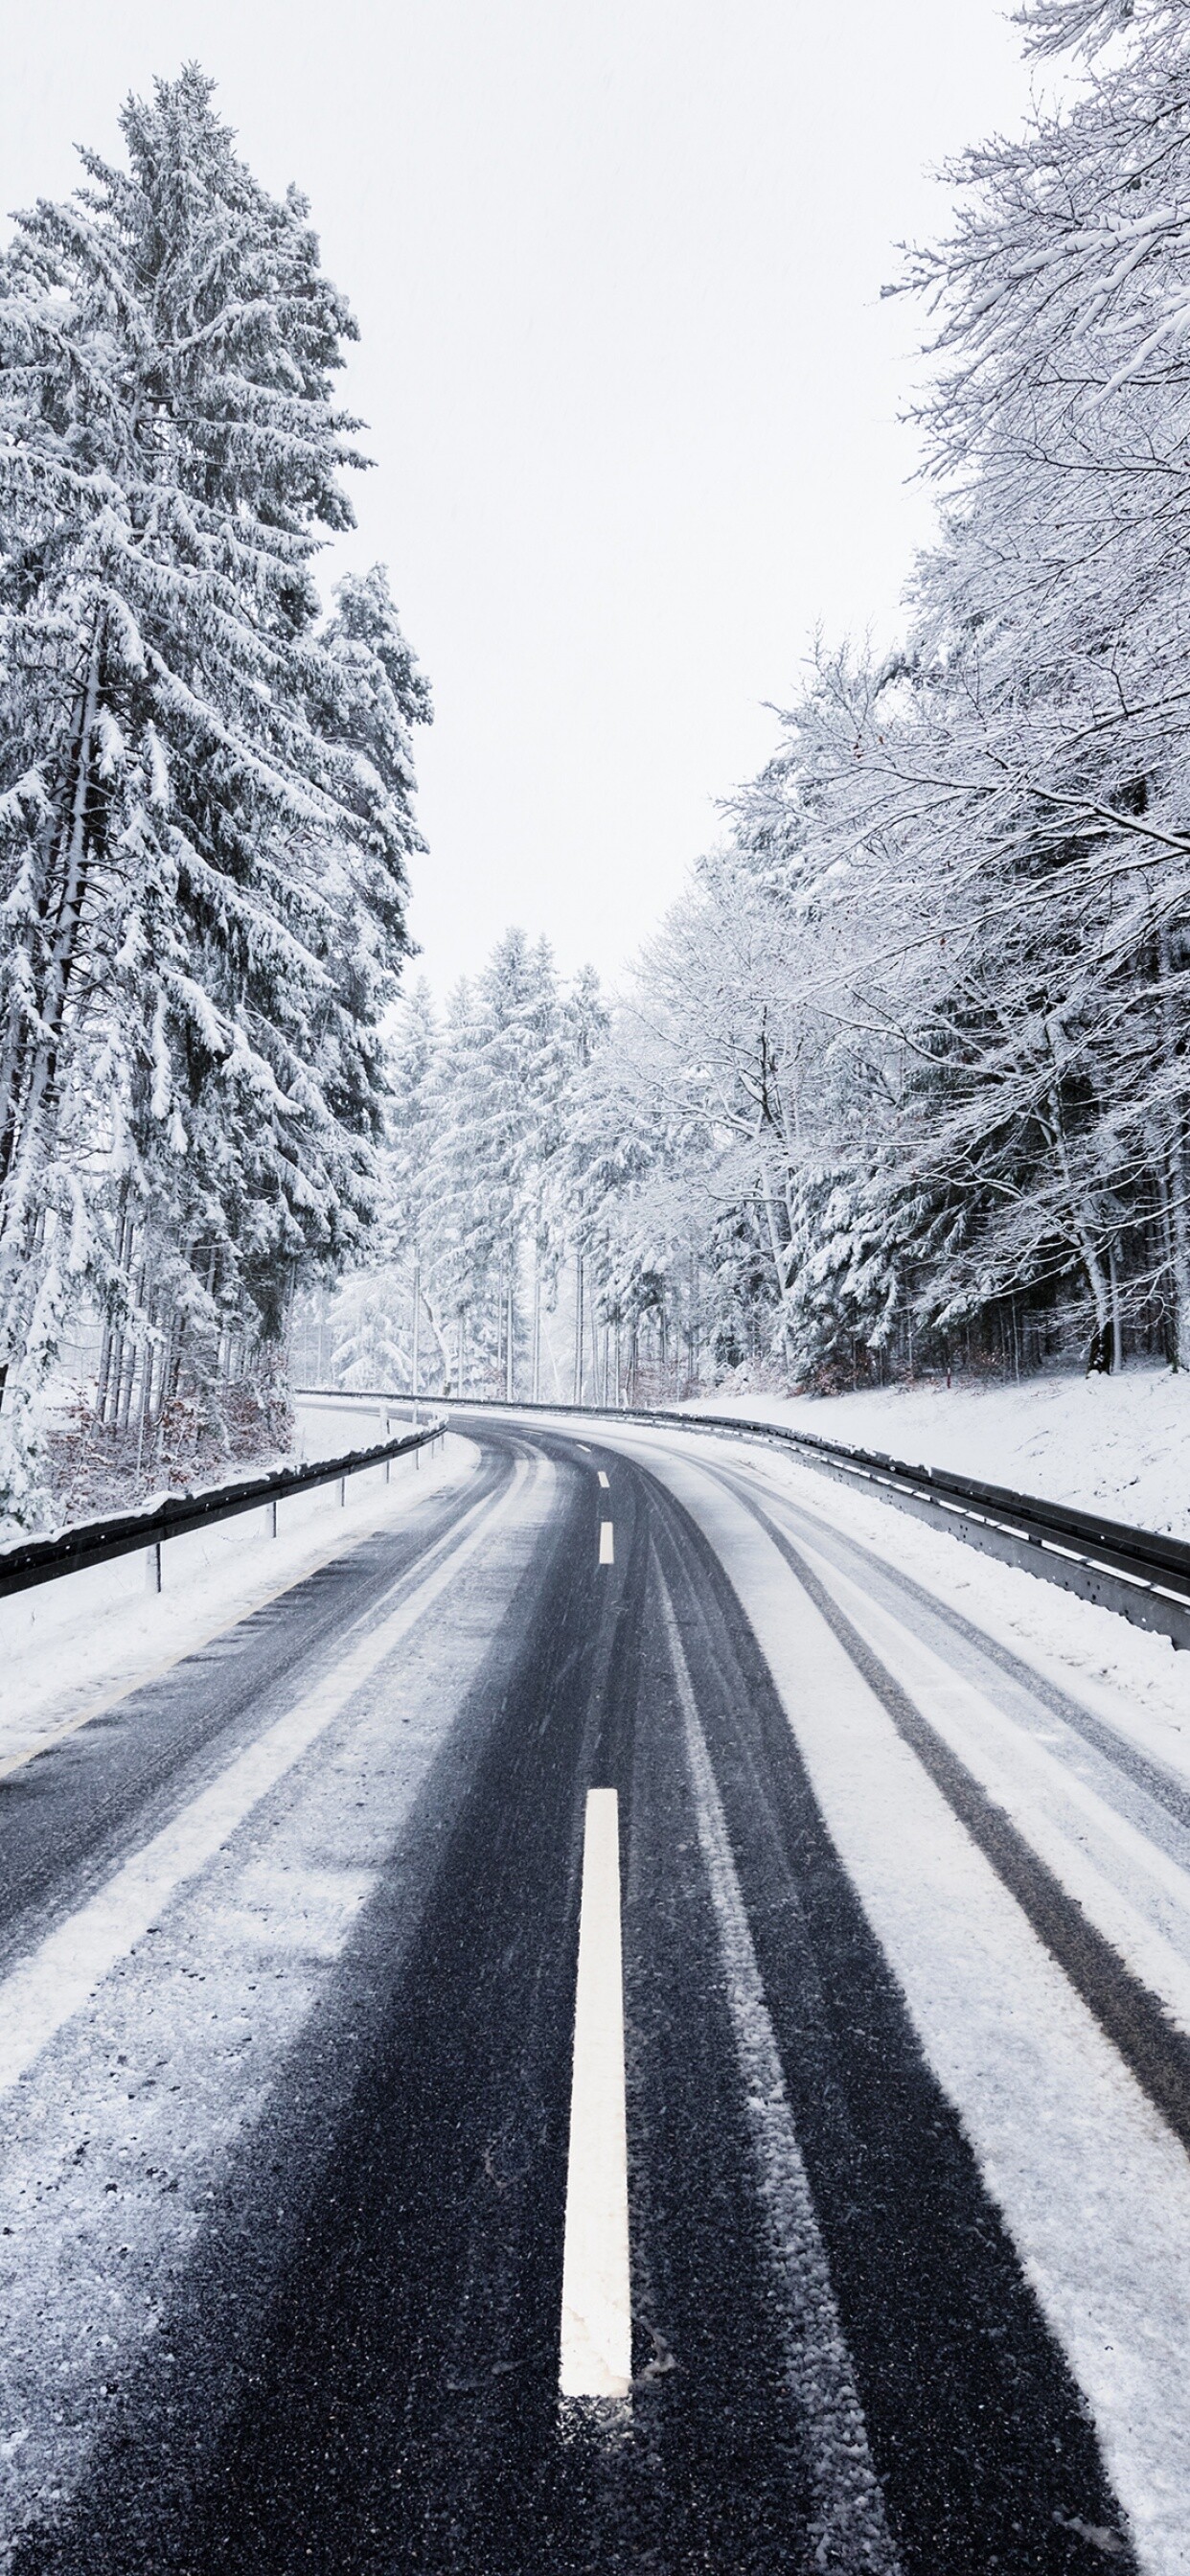 Winter: A snowy road, Icy-cold, Snow-generating weather events. 1250x2690 HD Wallpaper.